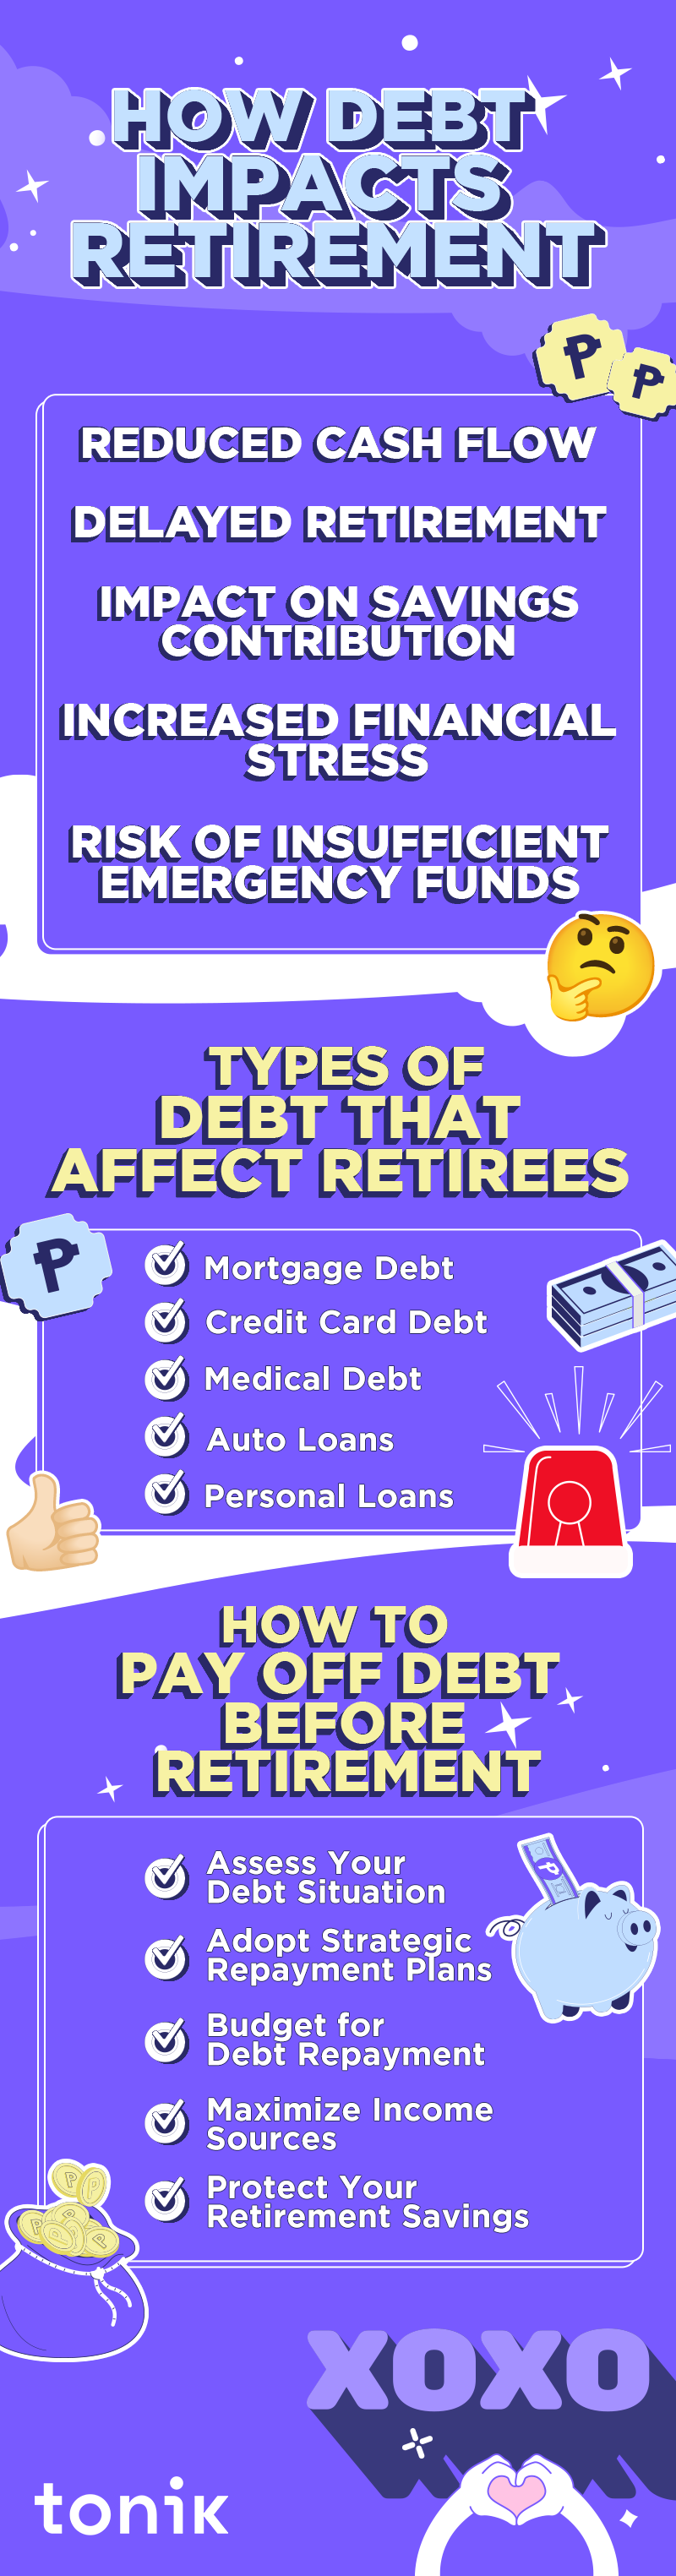 infographic on eliminating debt during retirement